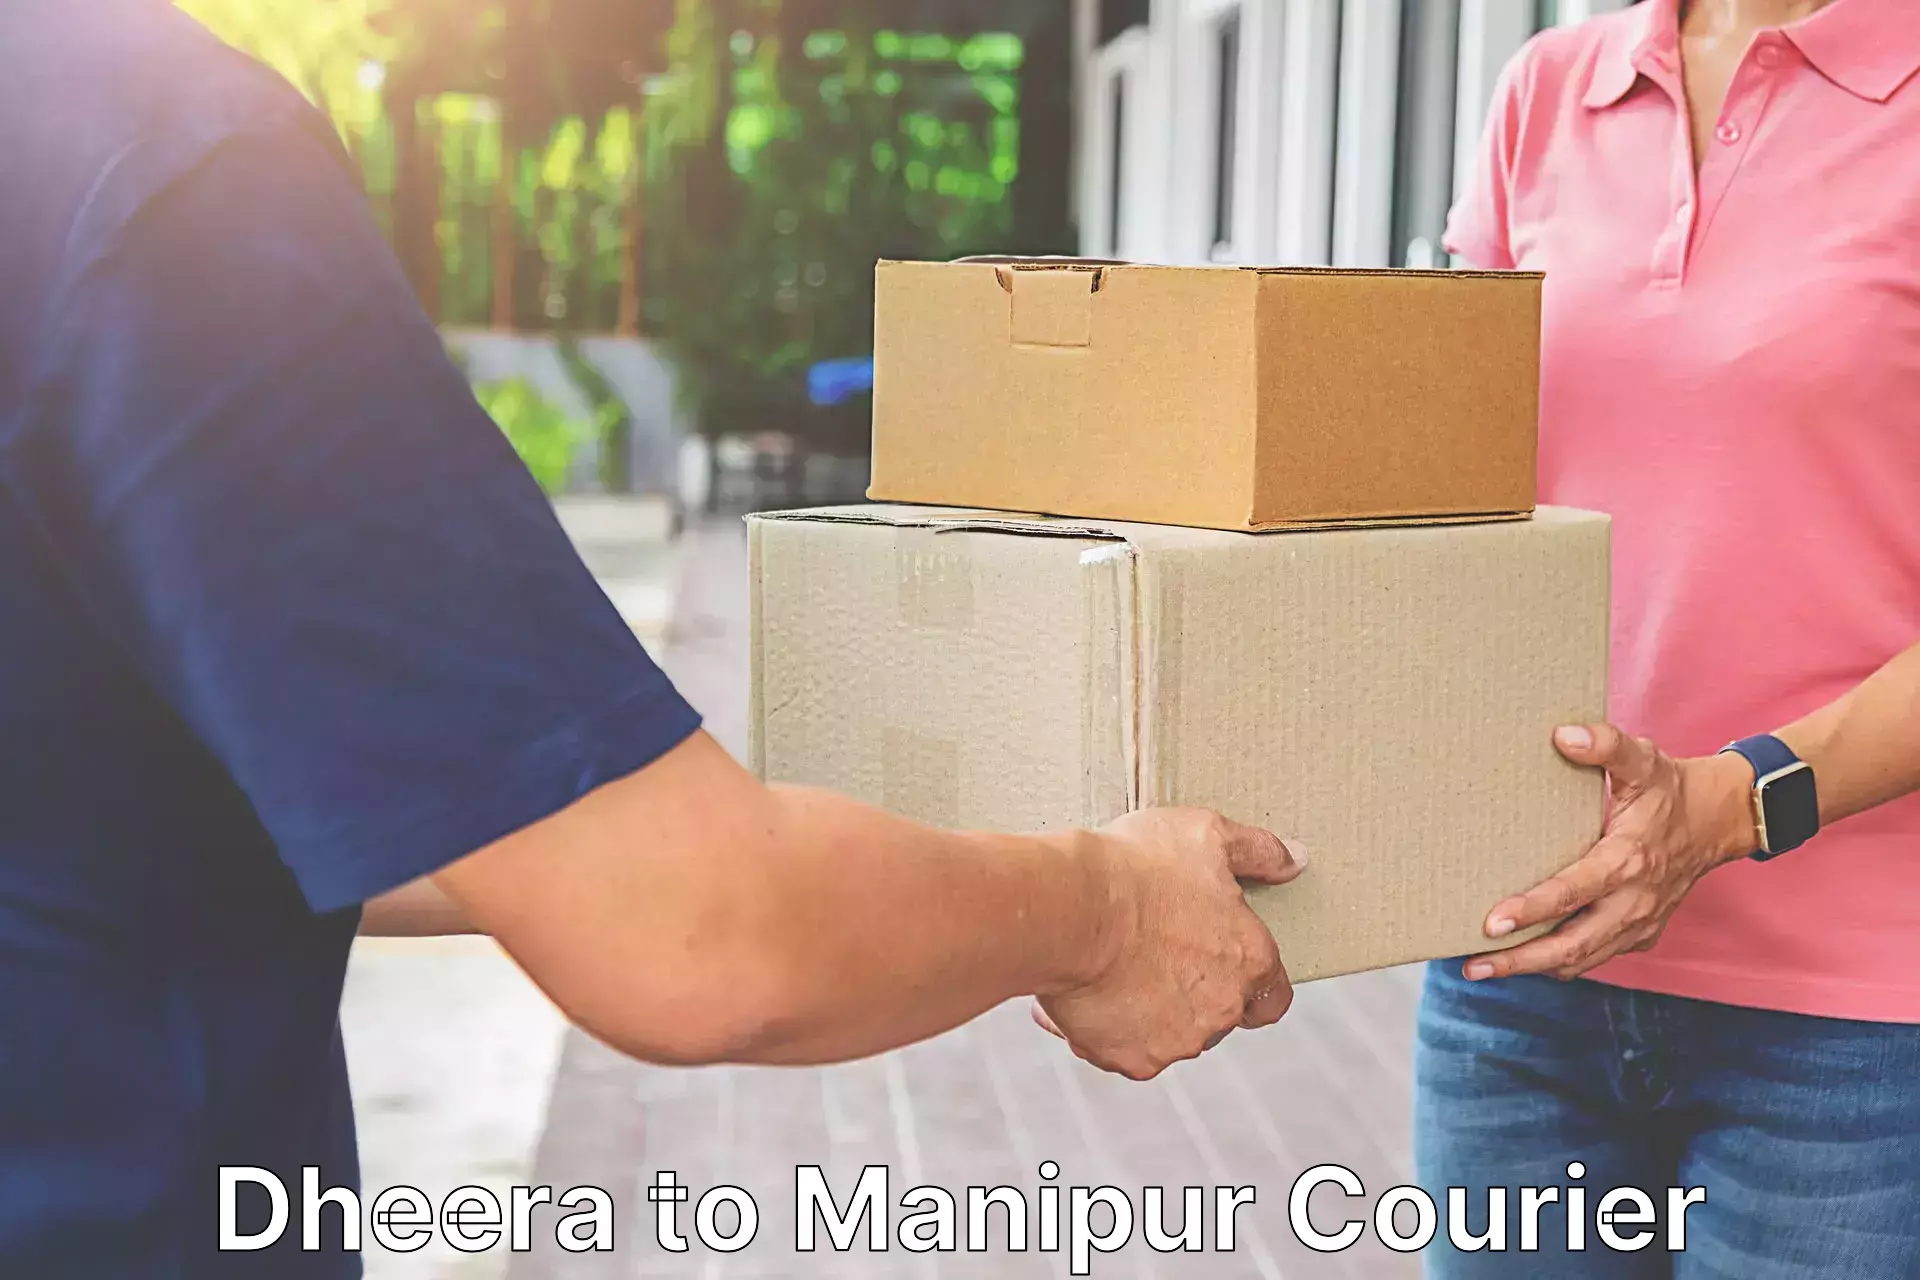 Next-day delivery options Dheera to Manipur